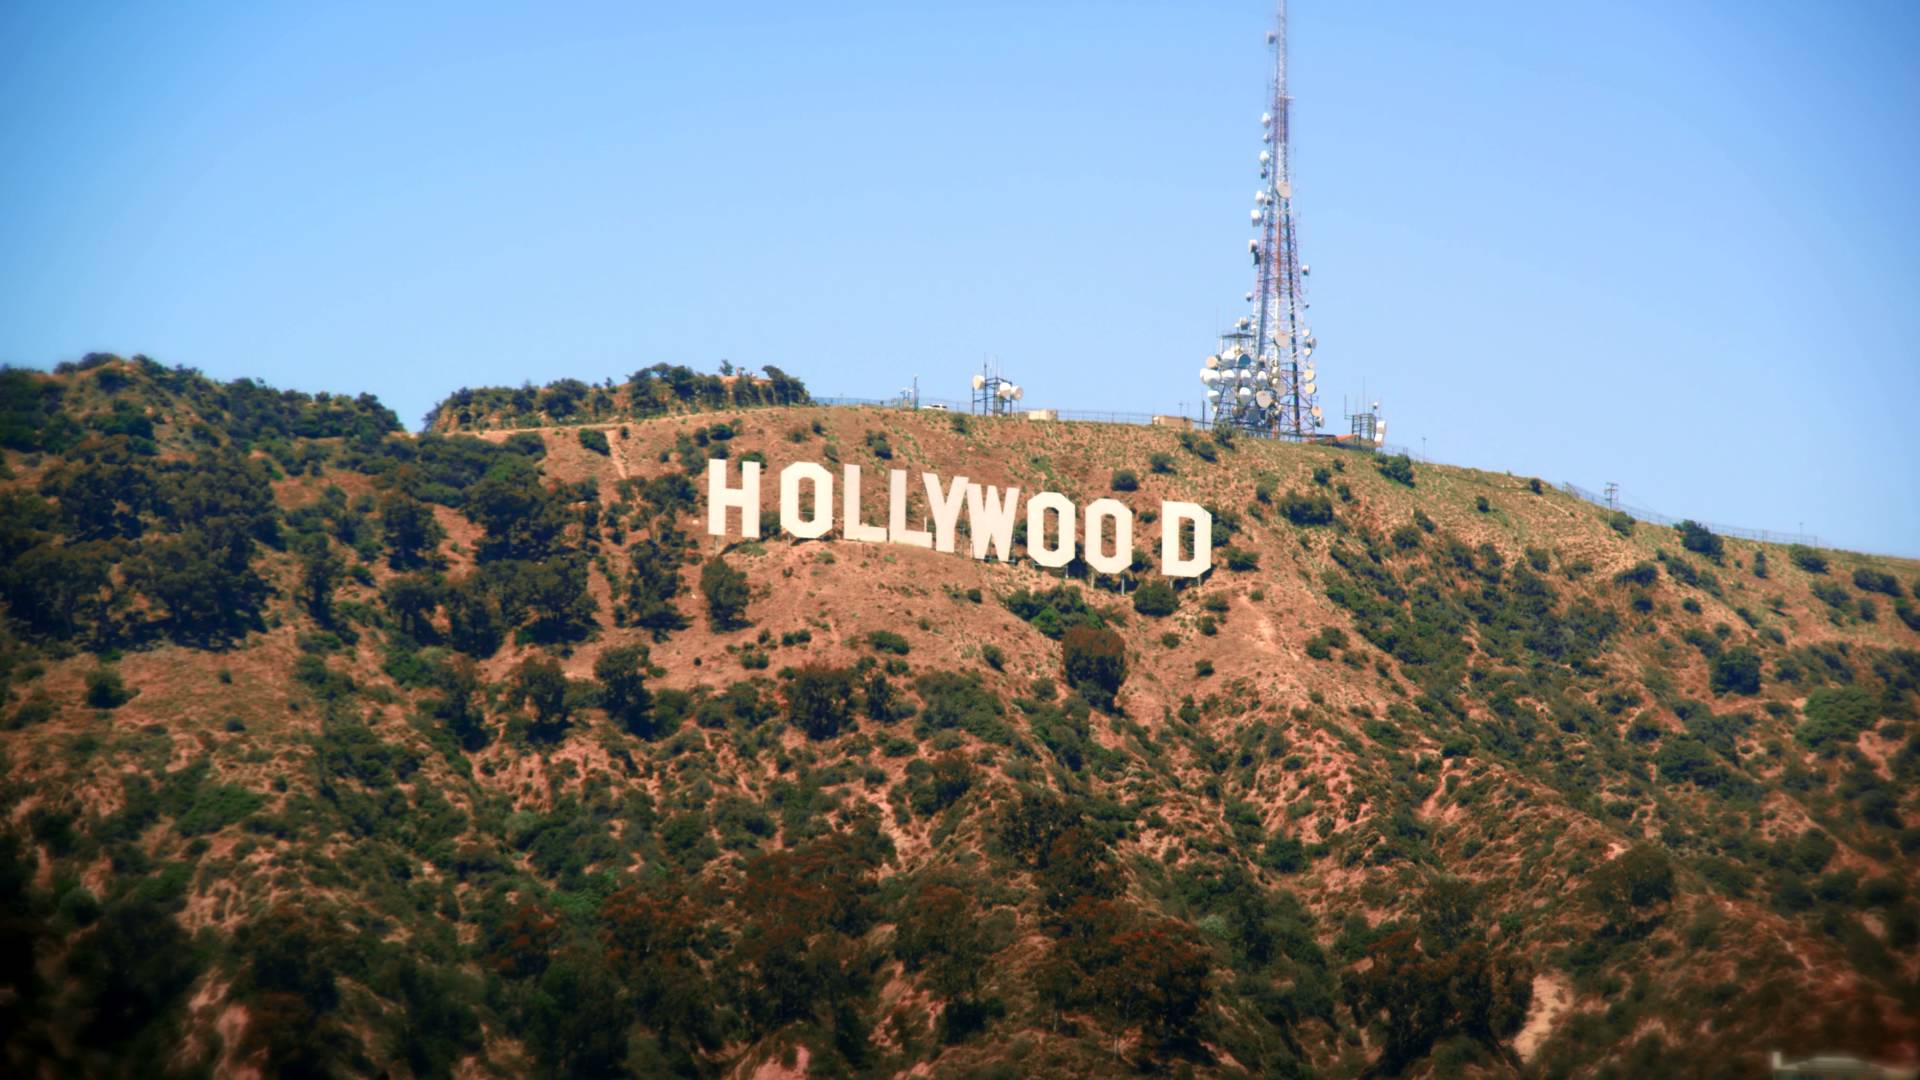 Displaying Image For Cool Hollywood Sign Wallpaper